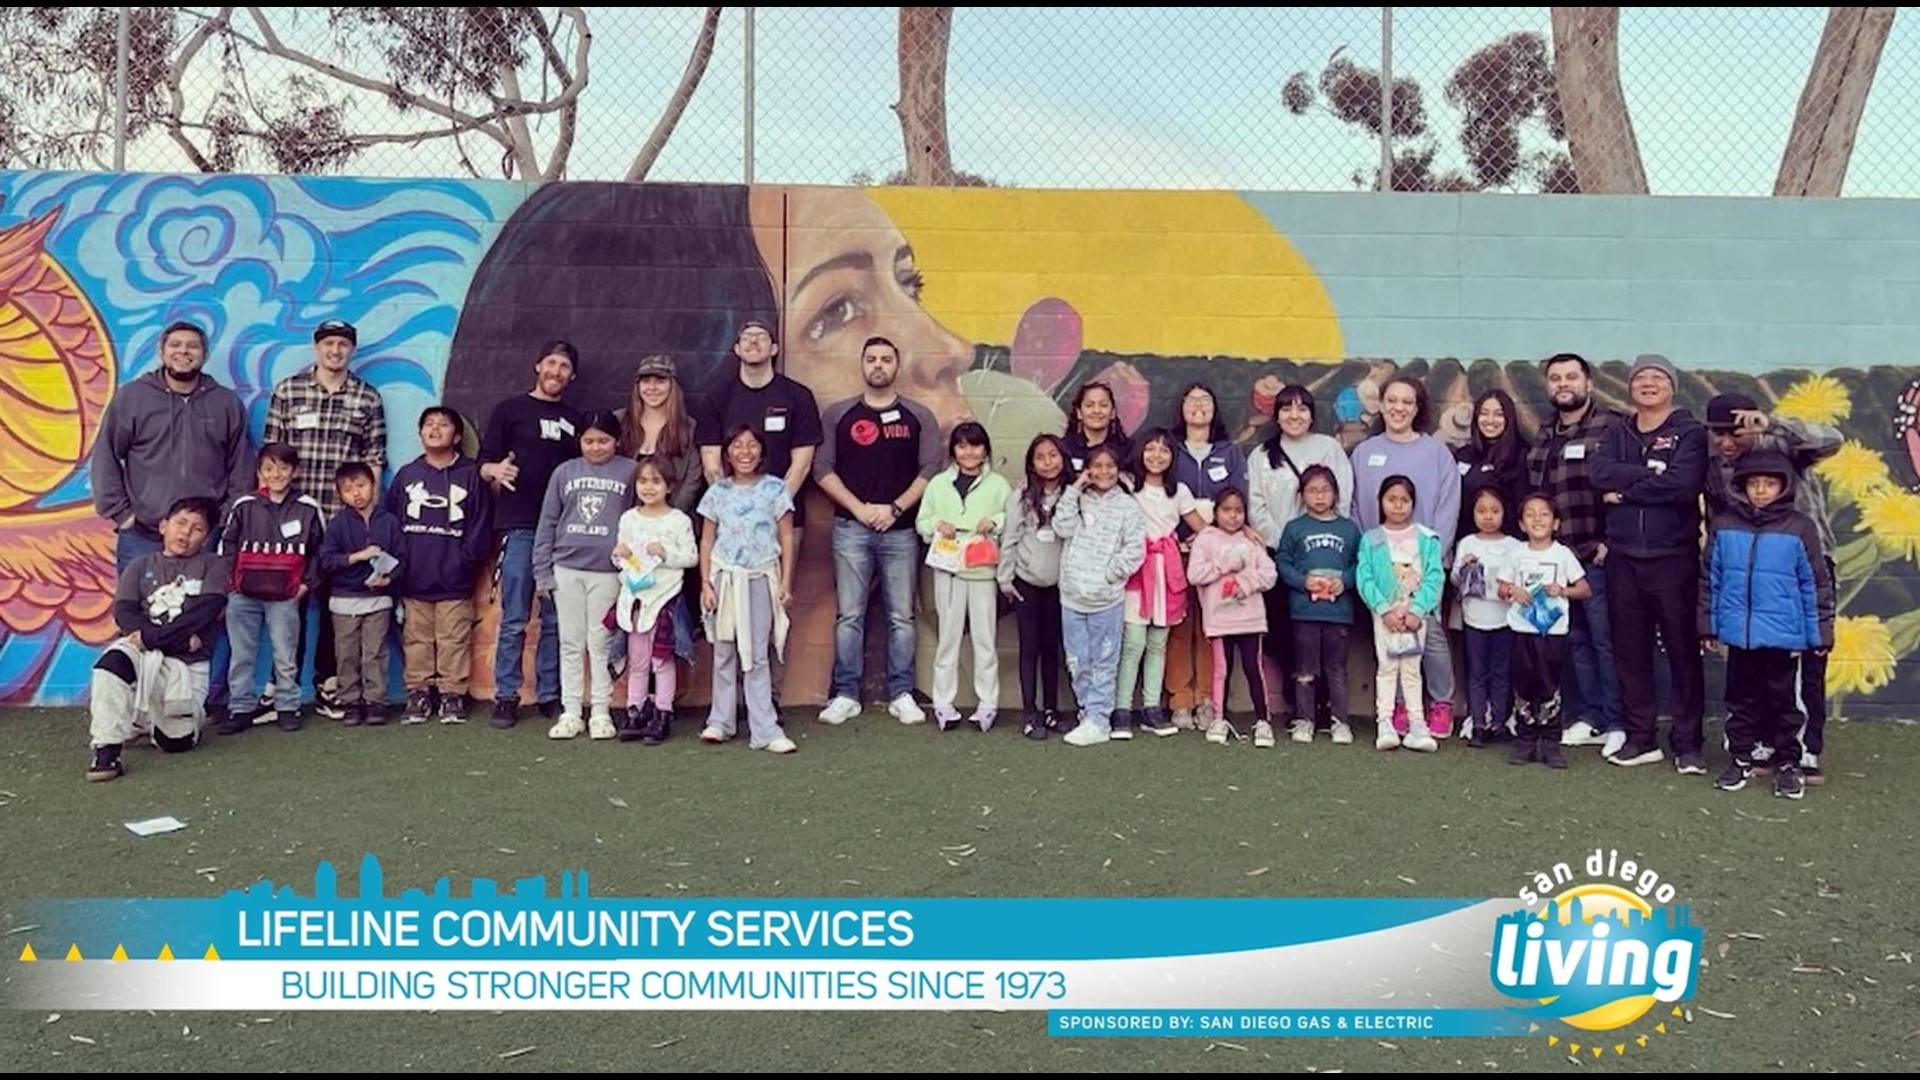 Lifeline Helps At-Risk Youth to Change Their Story. Sponsored by SDG&E